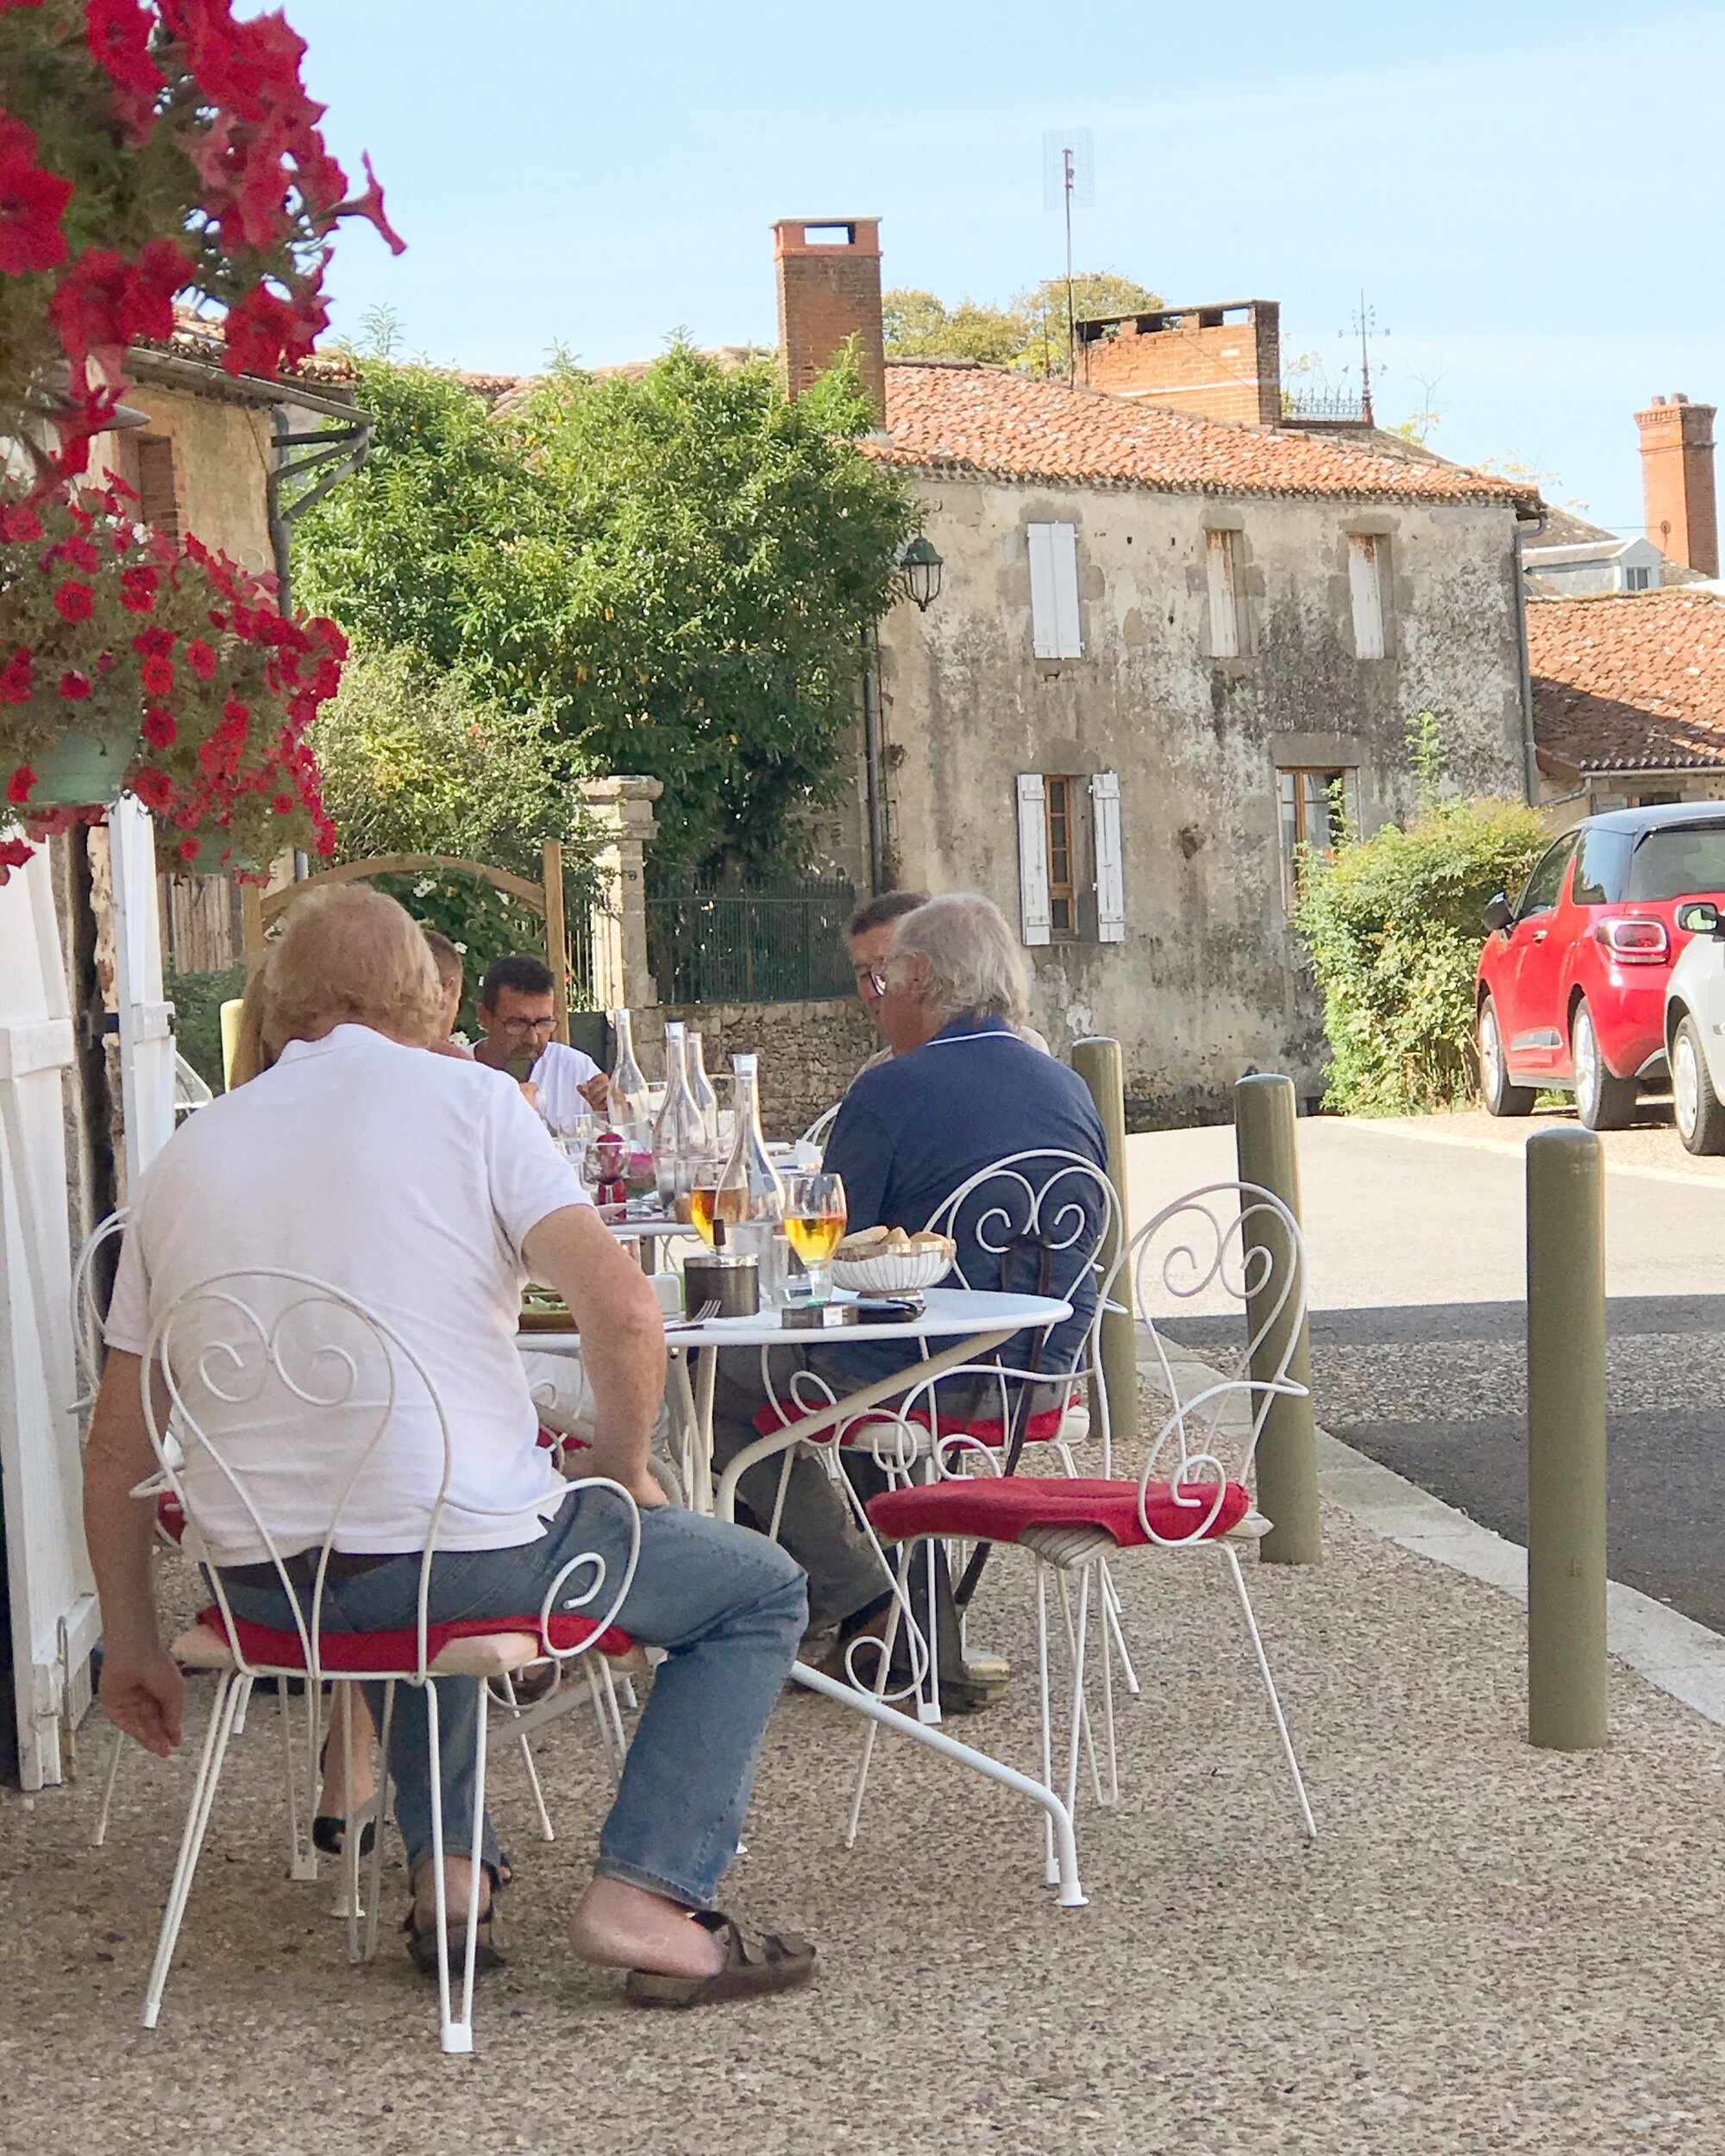 Lunch at the 'La Taverne' restaurant in the village.